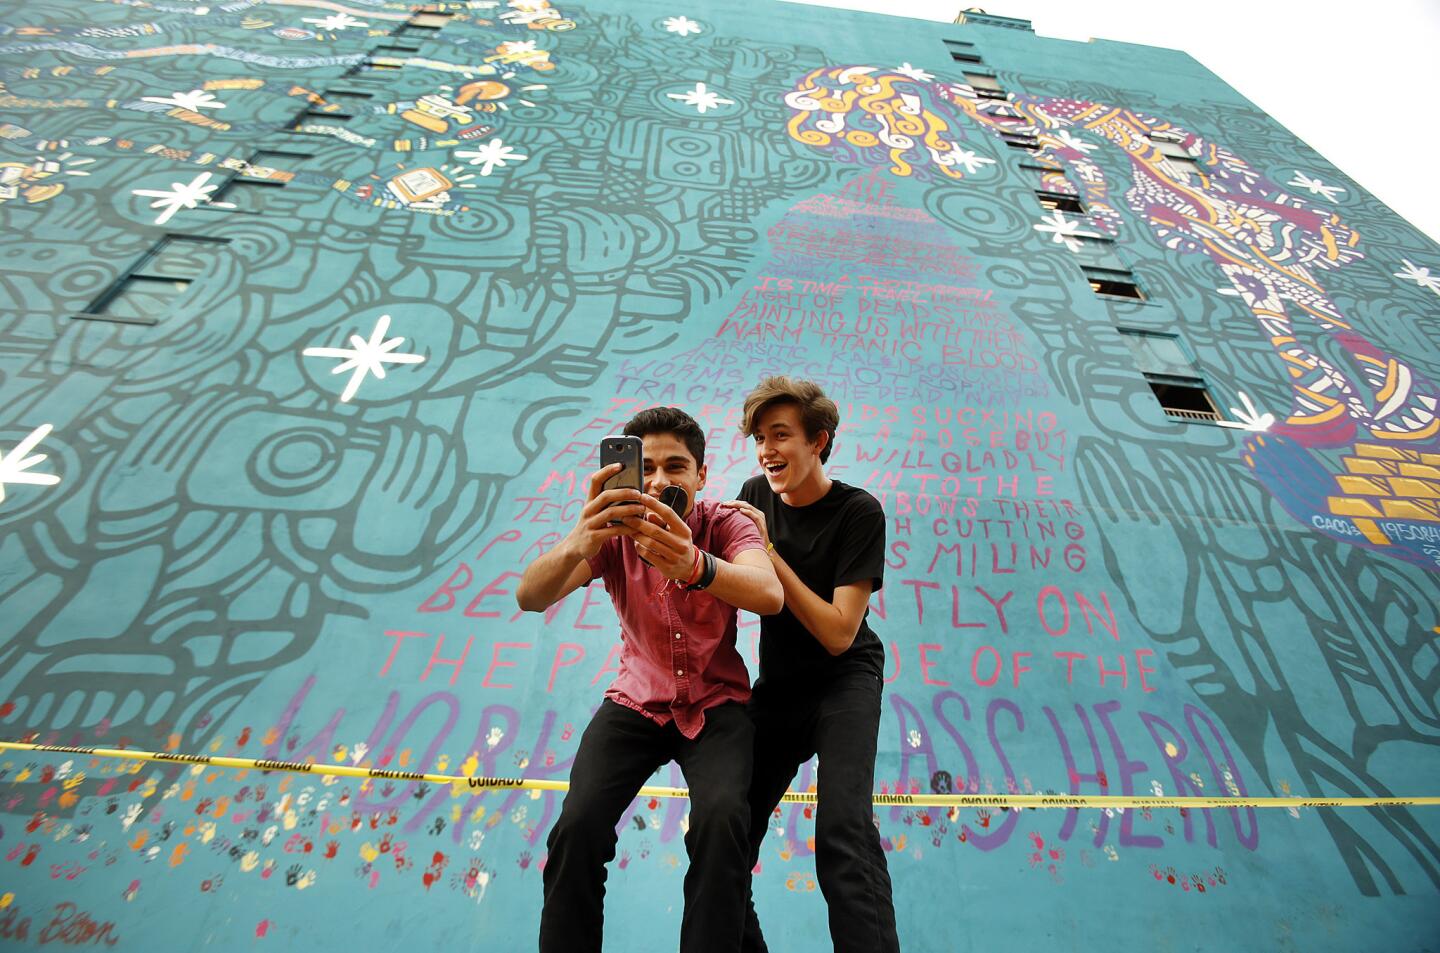 Tony Davia, left, takes a selfie with Lucas Connor, right, in front of the Foster the People mural on the wall of Sante Fe Building in downtown Los Angeles. Davia and Connor are from Laguna Beach and are in a band together. The owner of the building will decide the artwork's fate.